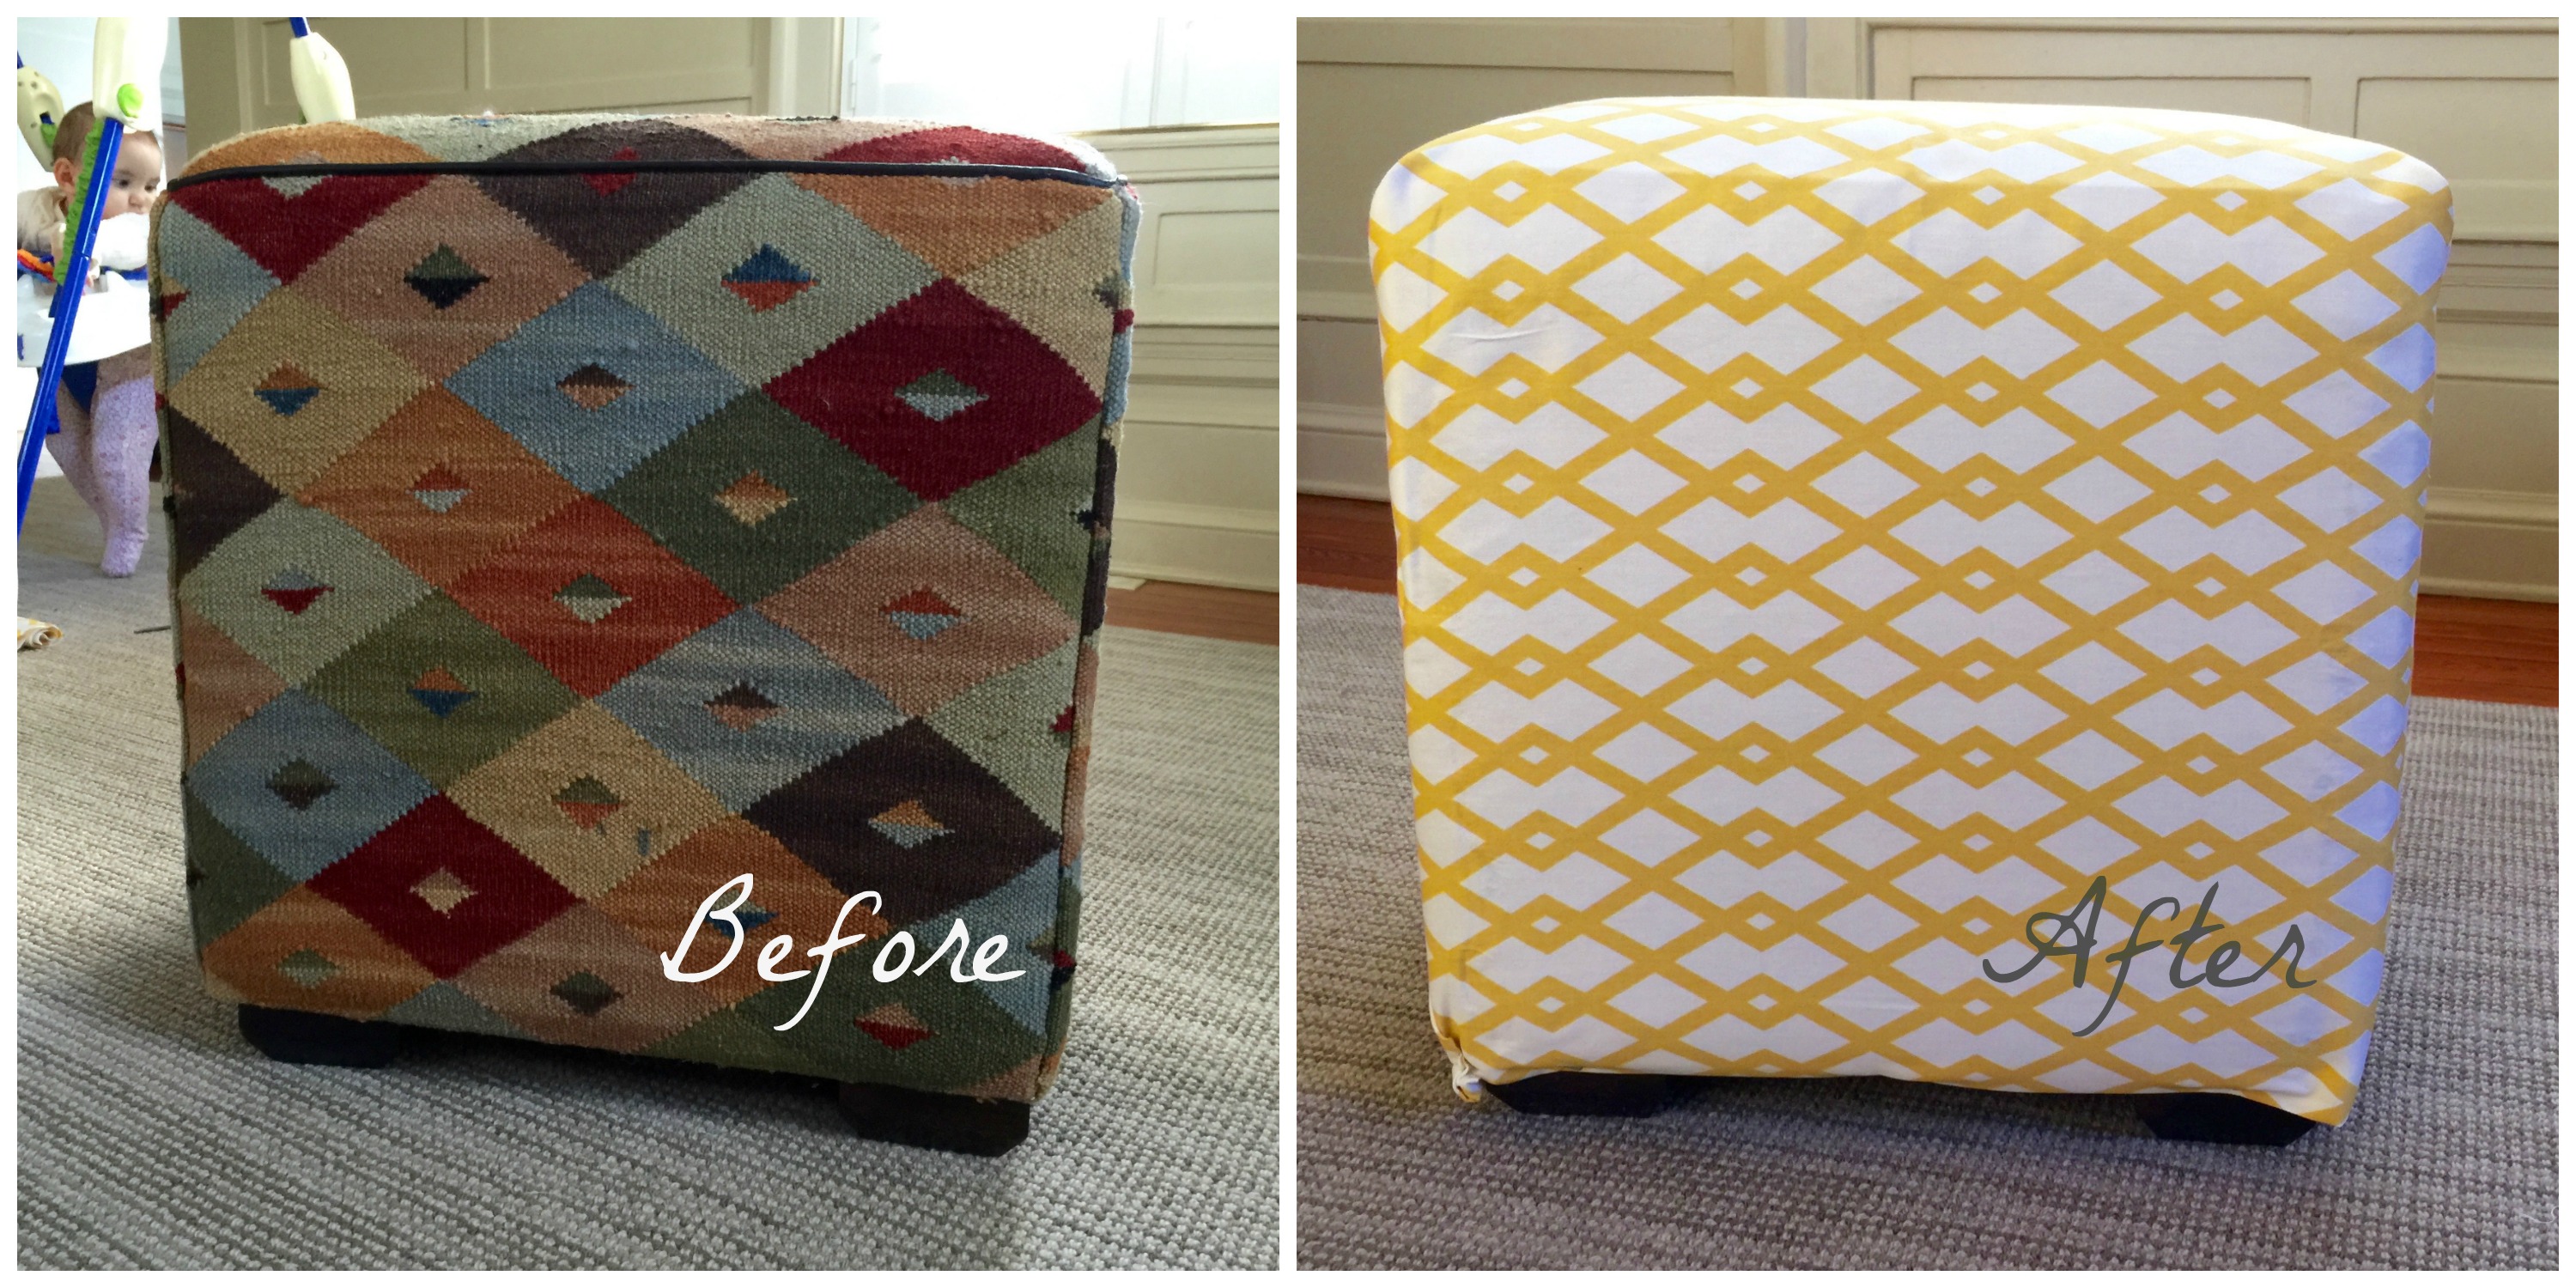 DIY ottoman before after